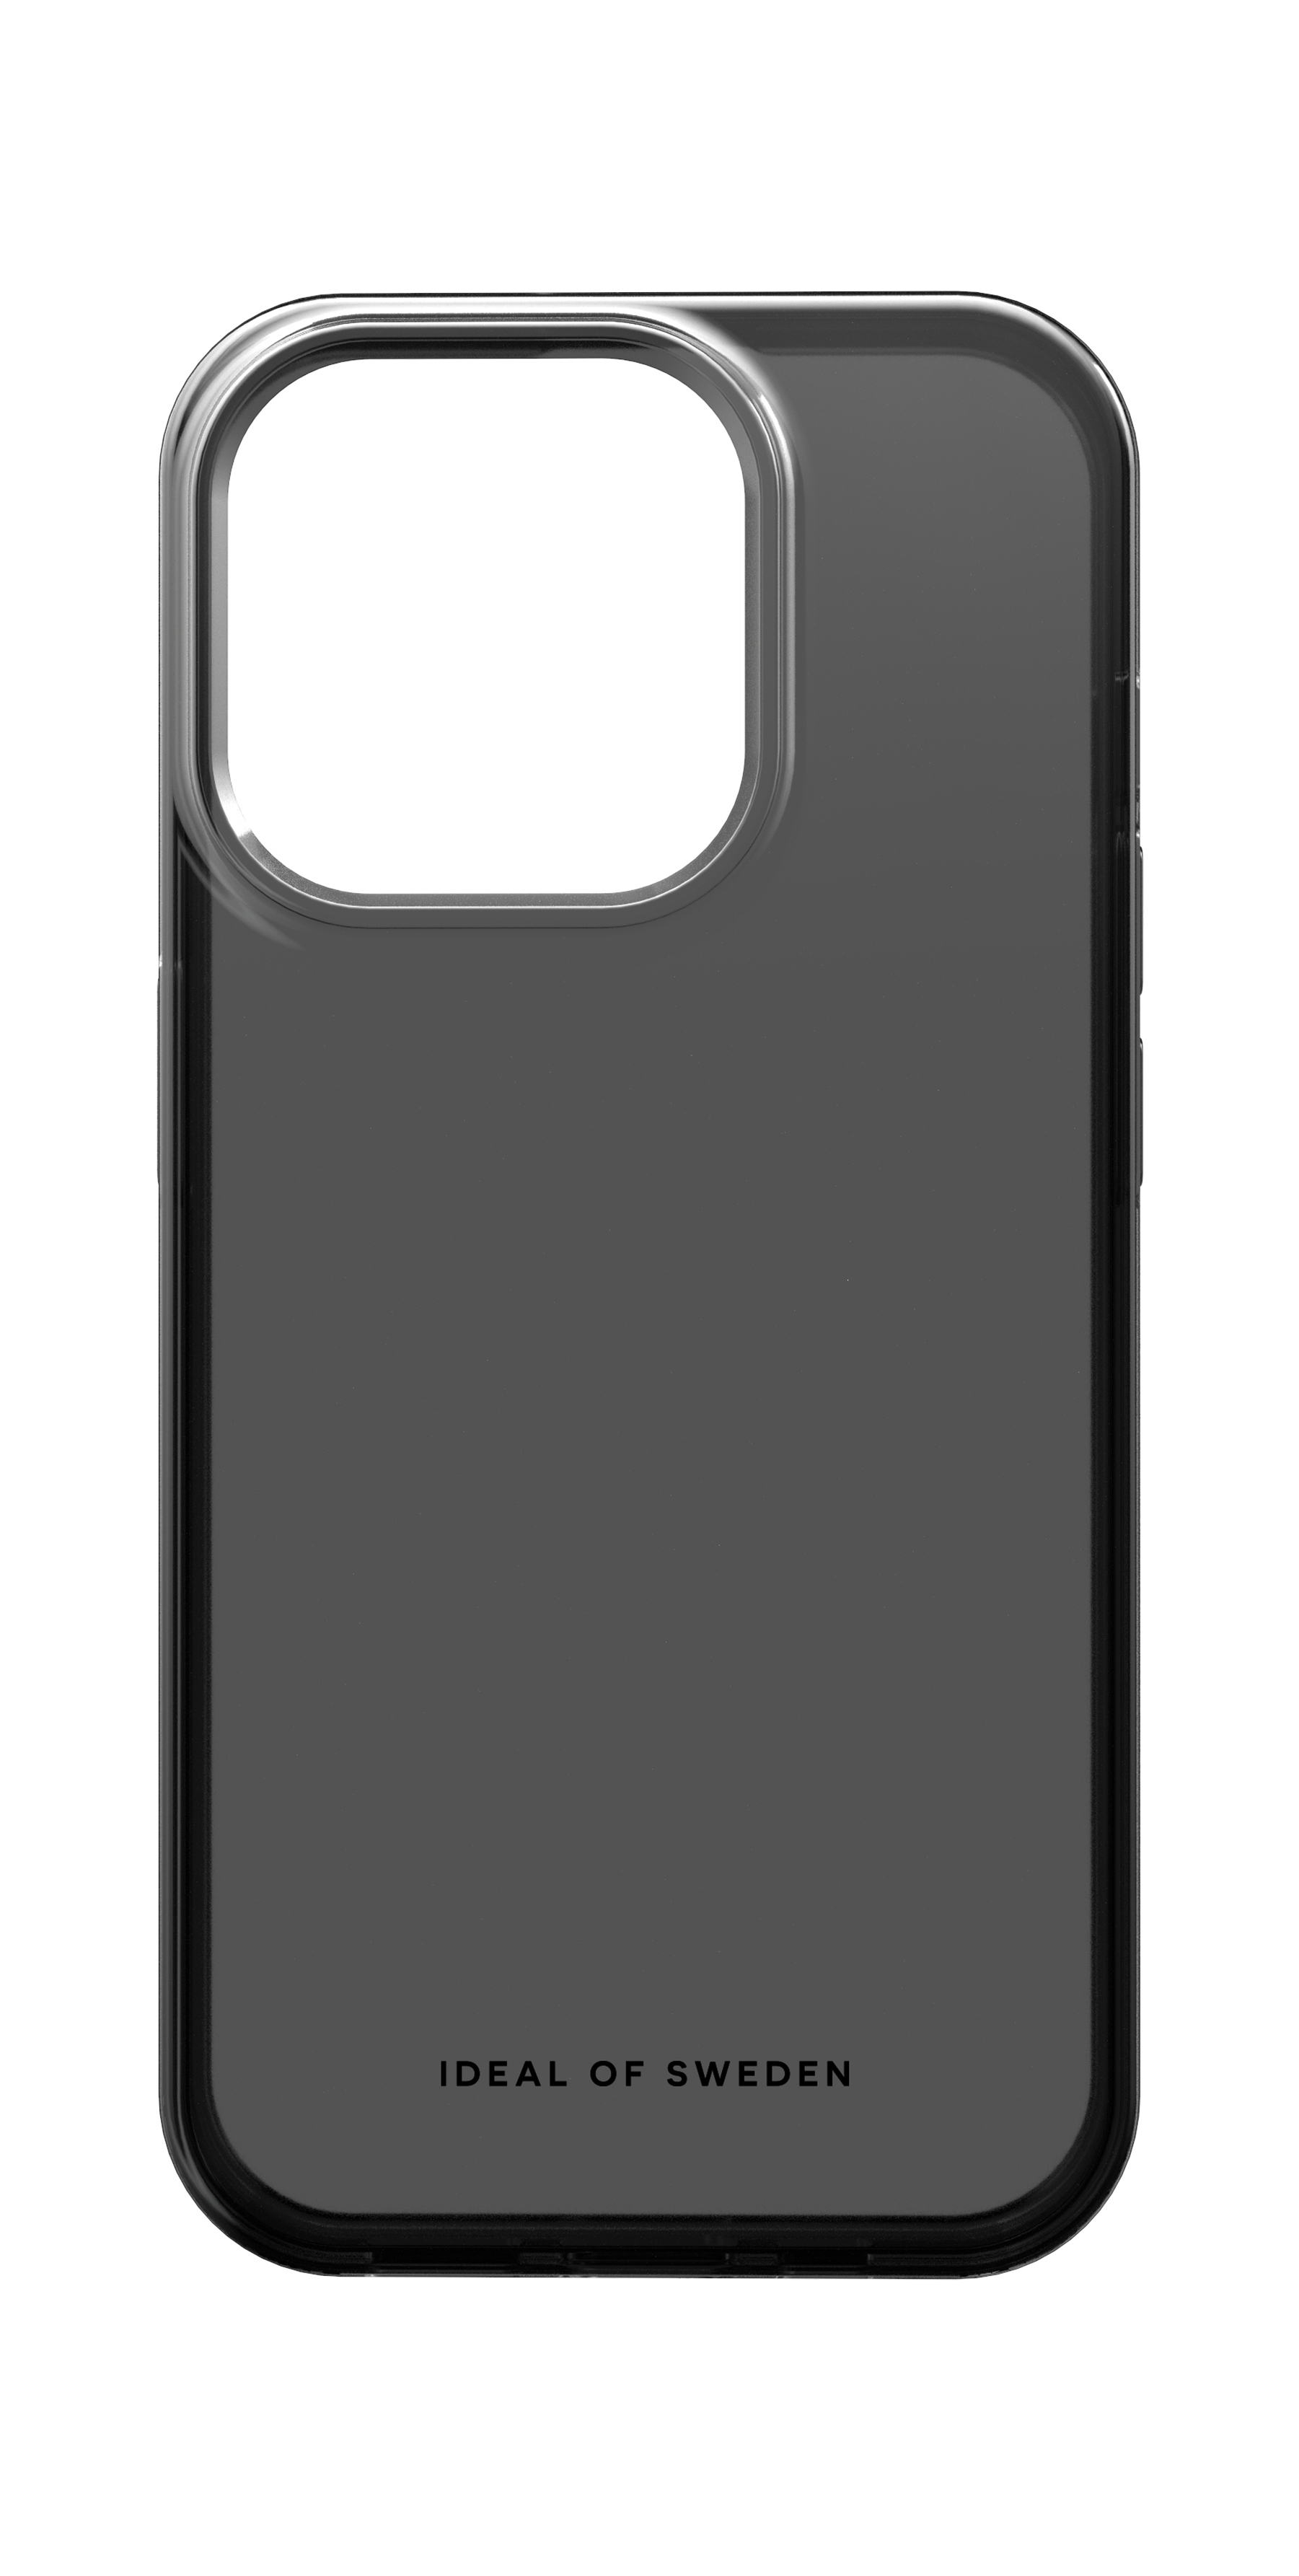 IDEAL OF Black Case, iPhone Clear 15 Backcover, Tinted SWEDEN Apple, Pro